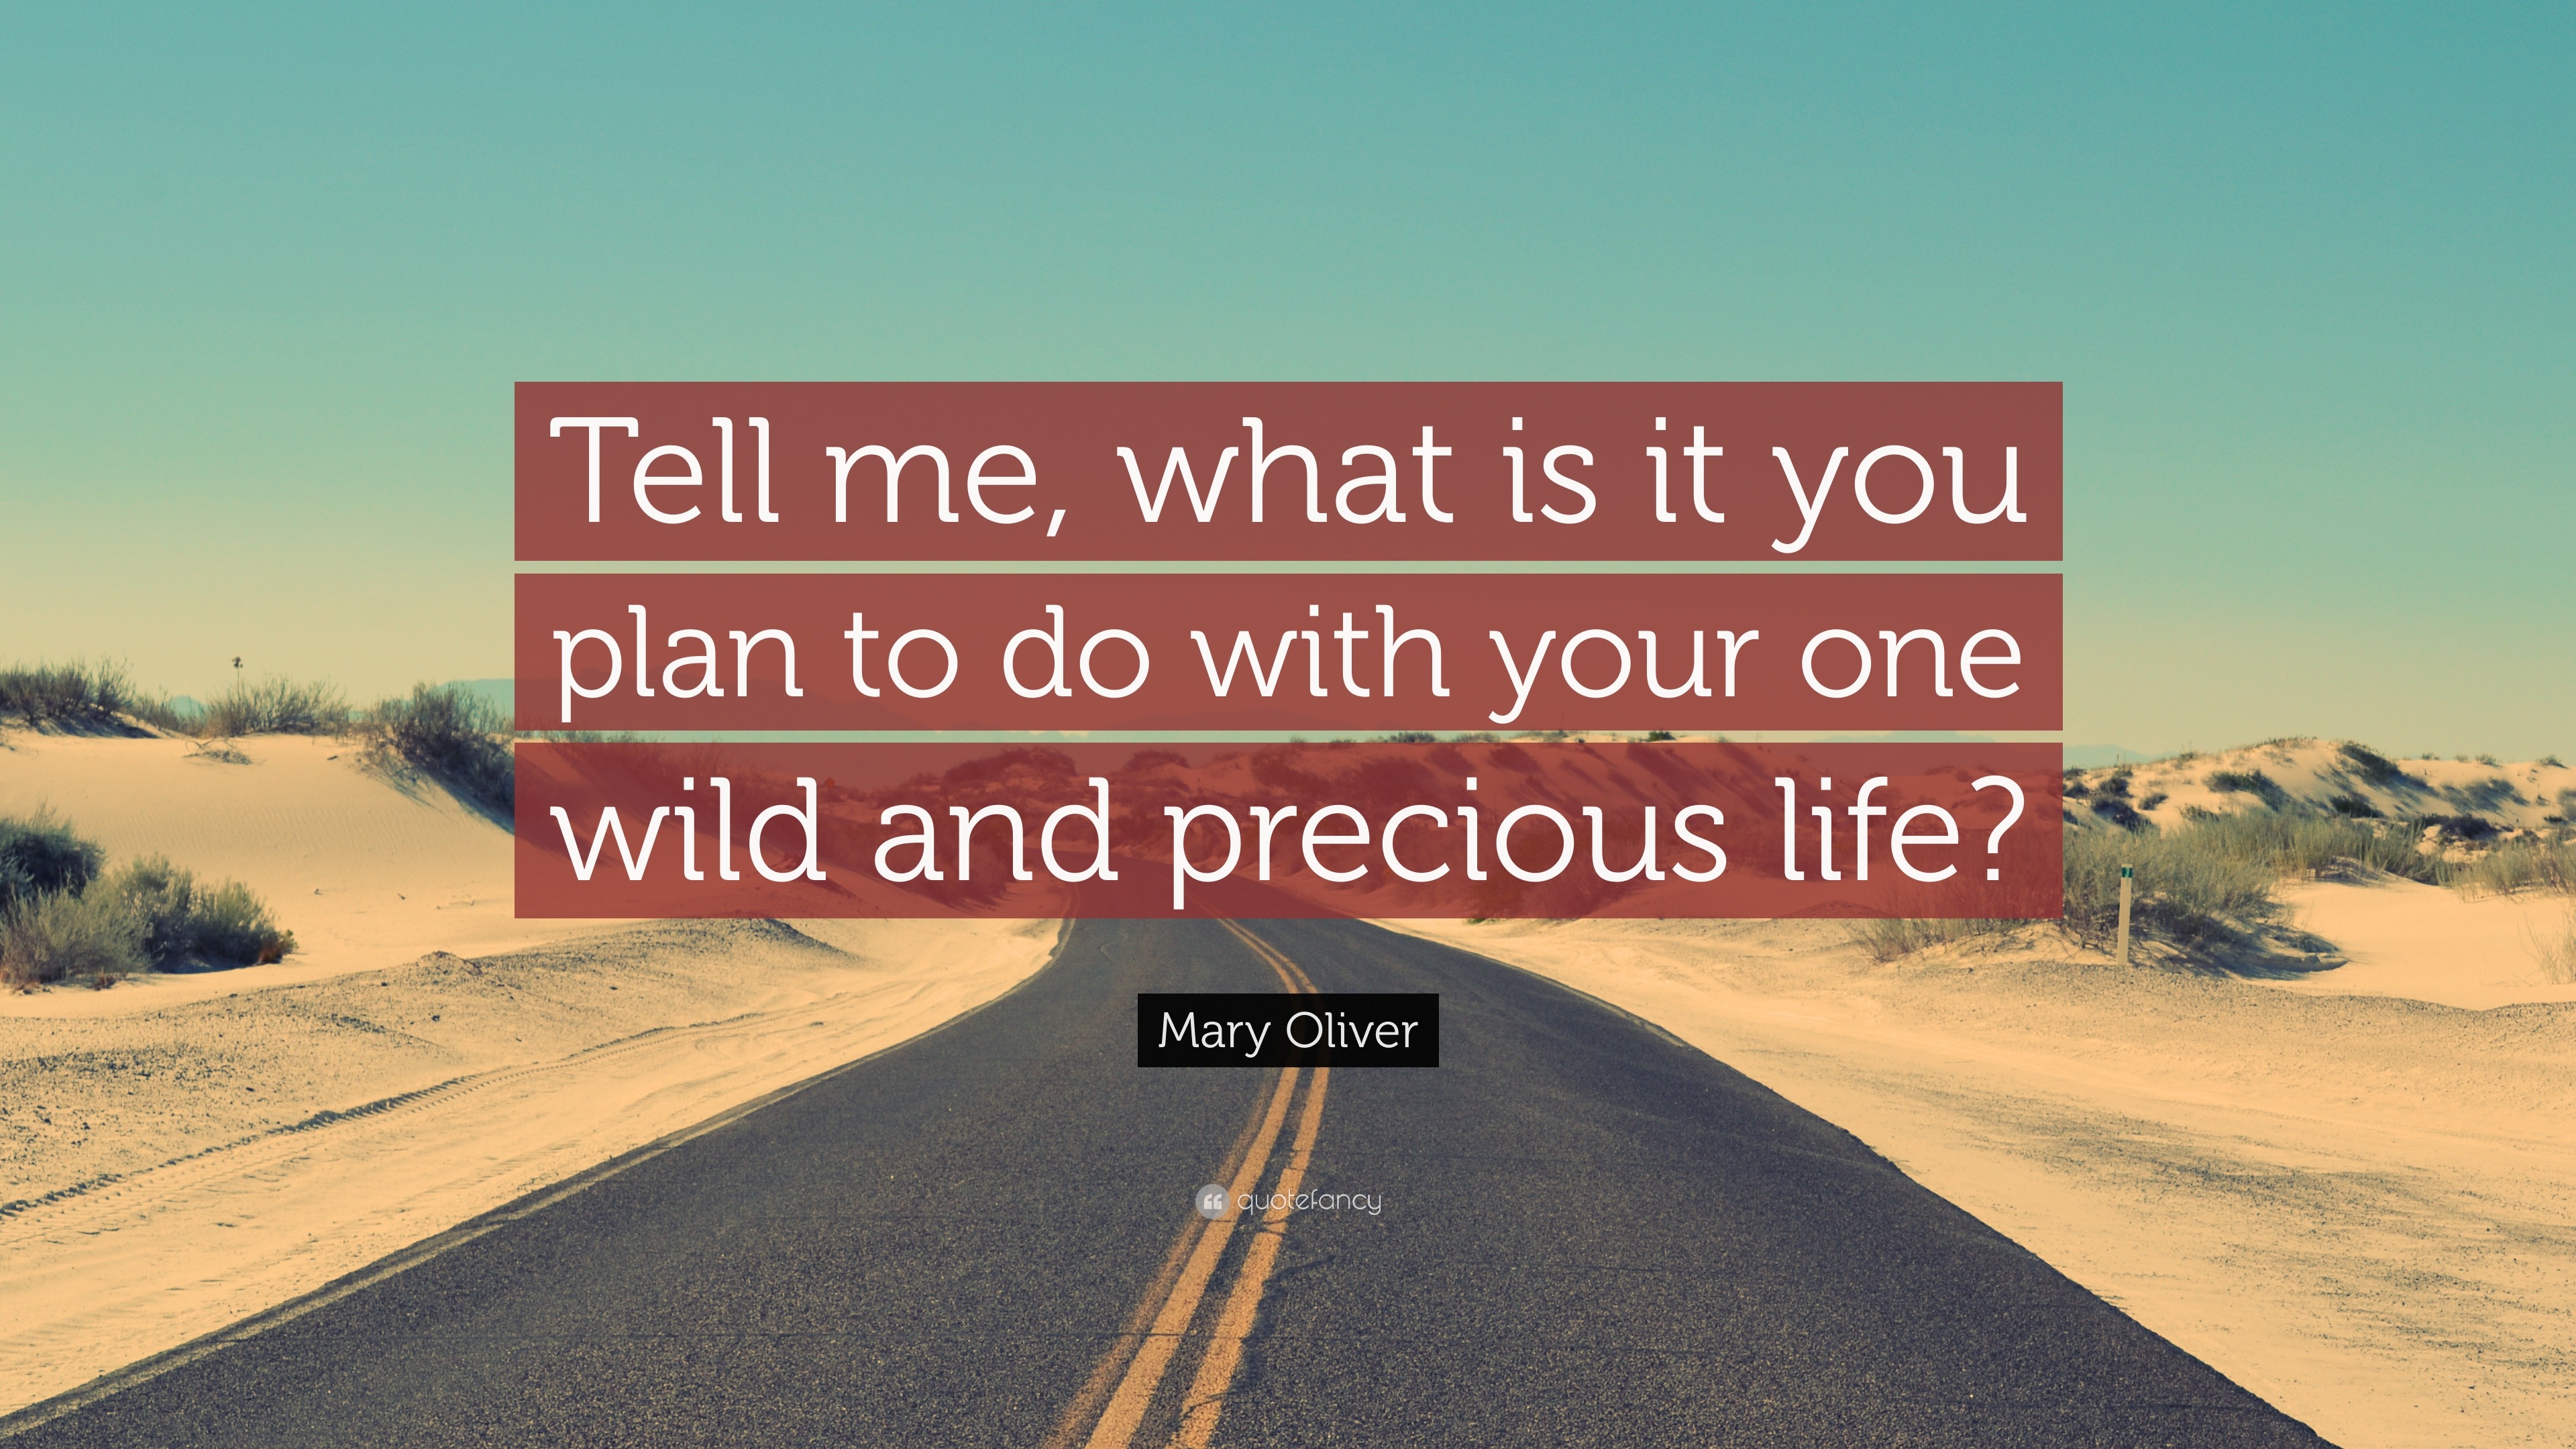 Mary Oliver Quote: "Tell me, what is it you plan to do ...